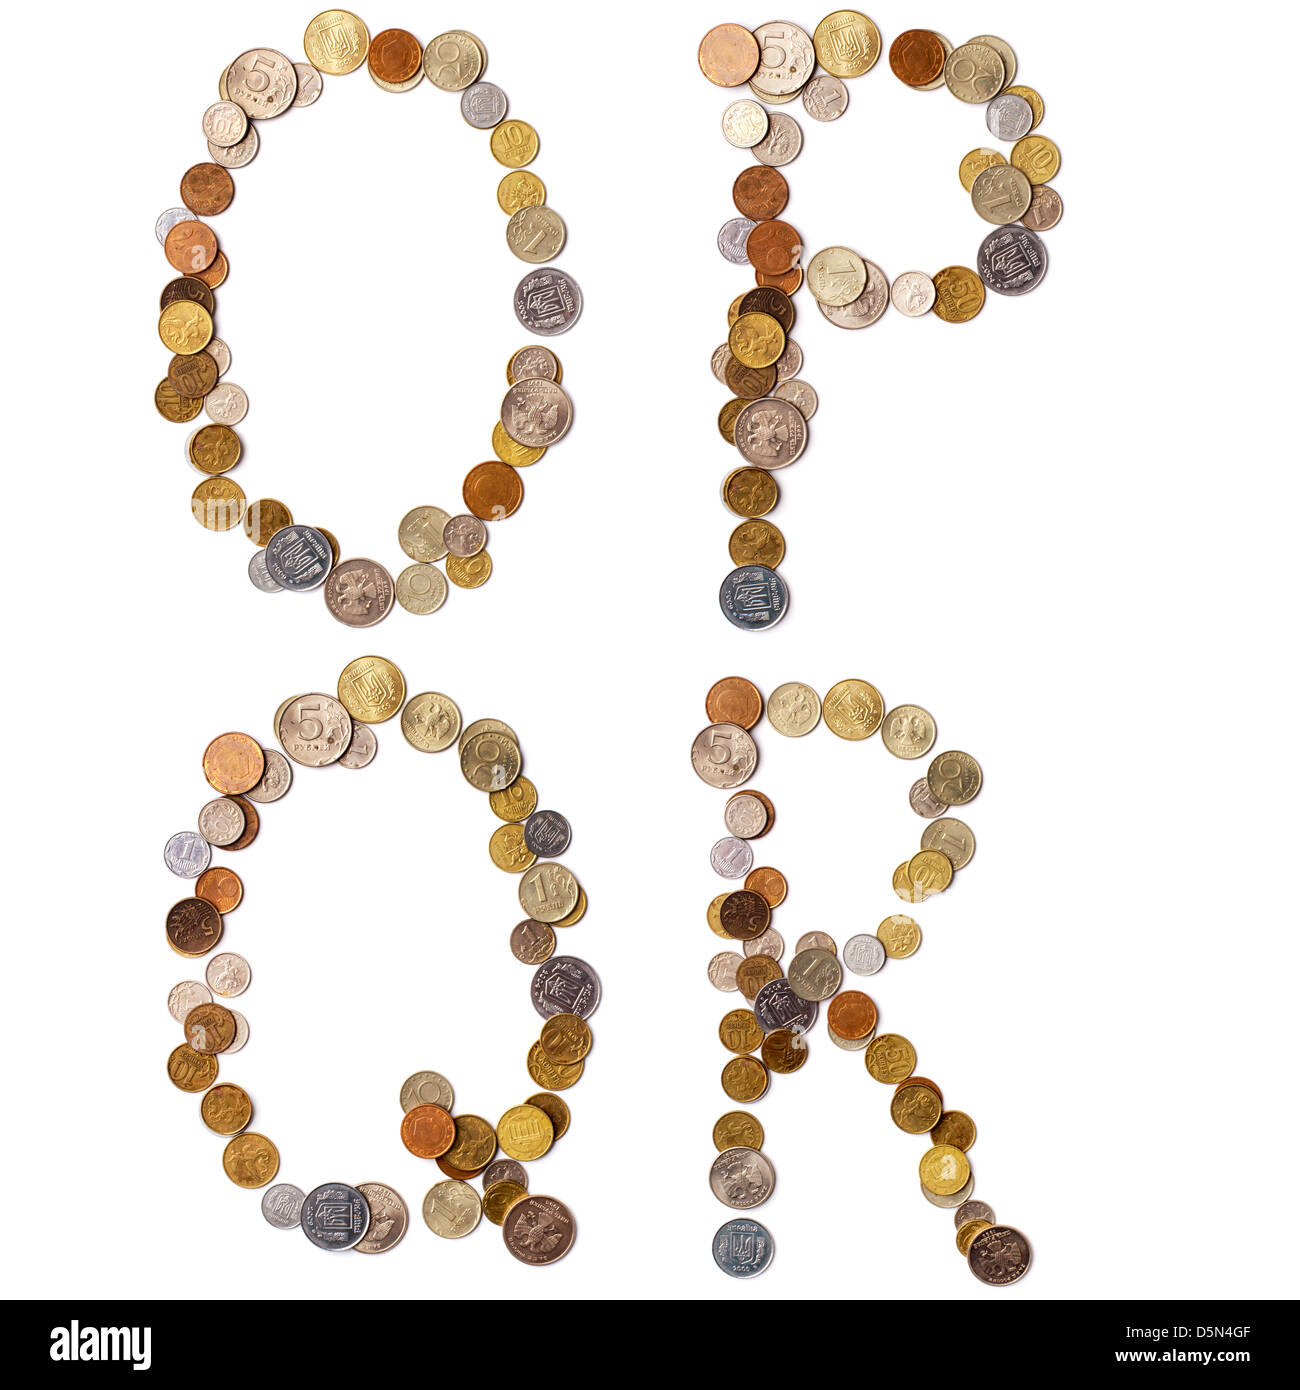 O-P-Q-R alphabet letters from the coins Stock Photo